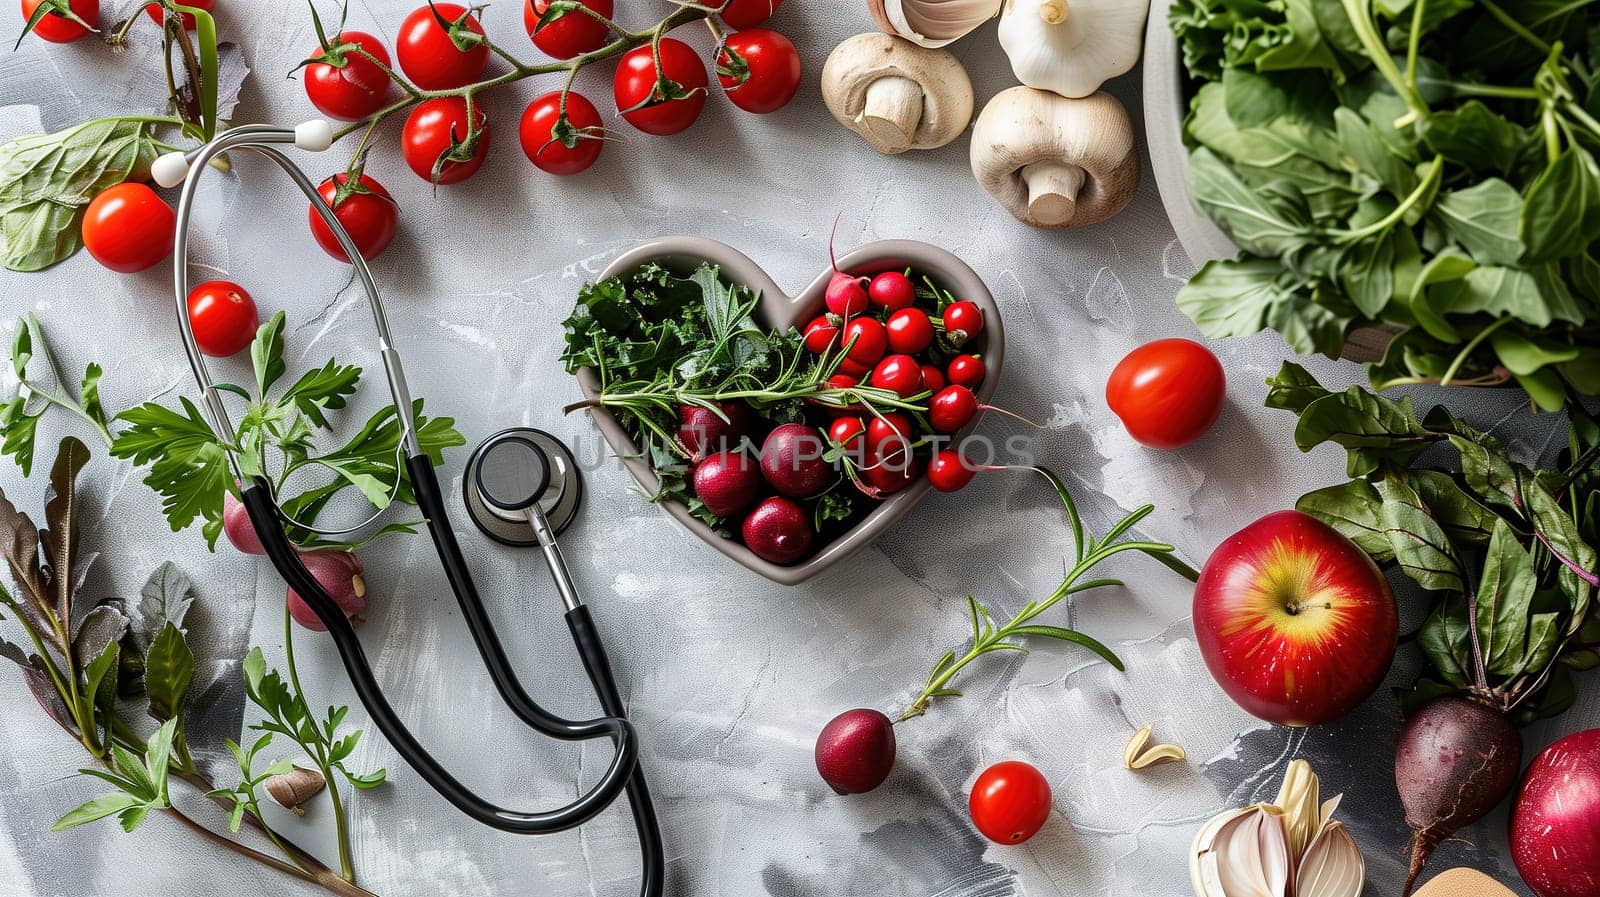 Abundant Vegetables and Stethoscope on Table by TRMK